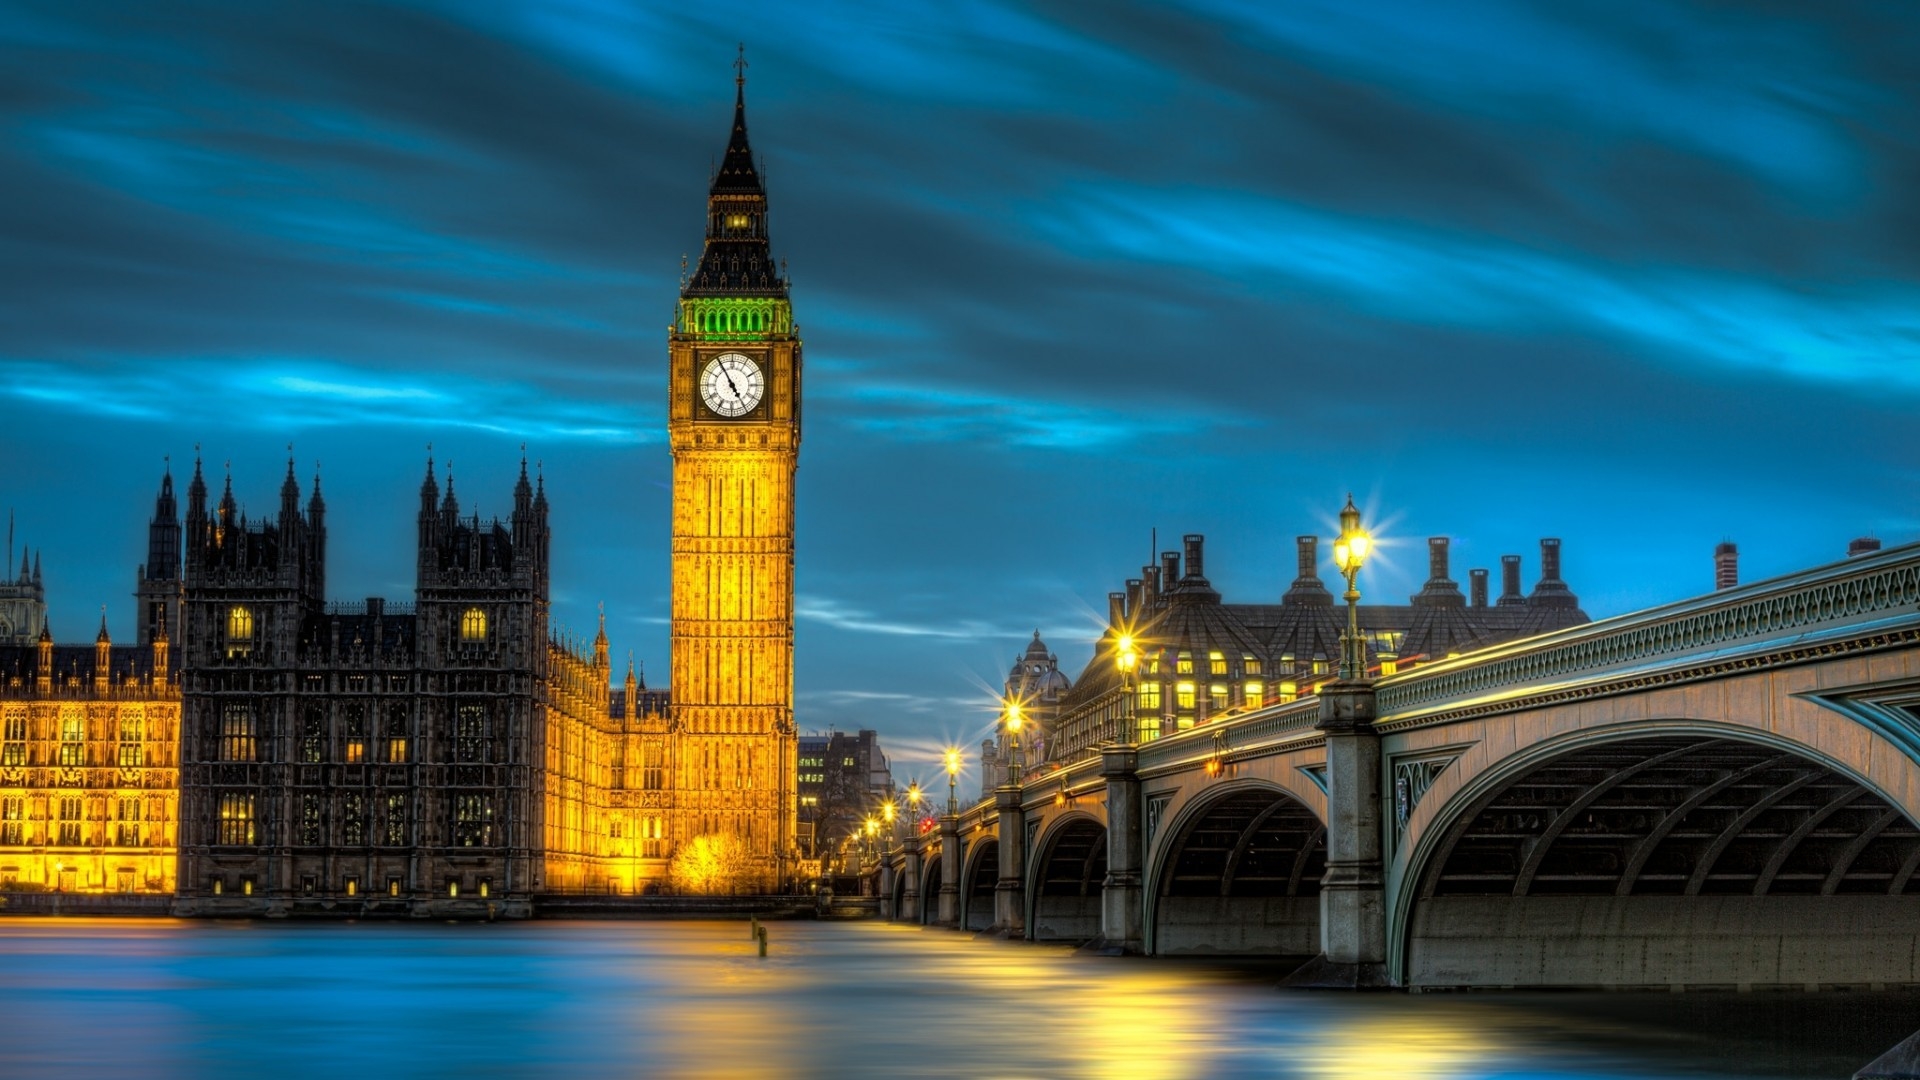 Amazing Palace of Westminster for 1920 x 1080 HDTV 1080p resolution